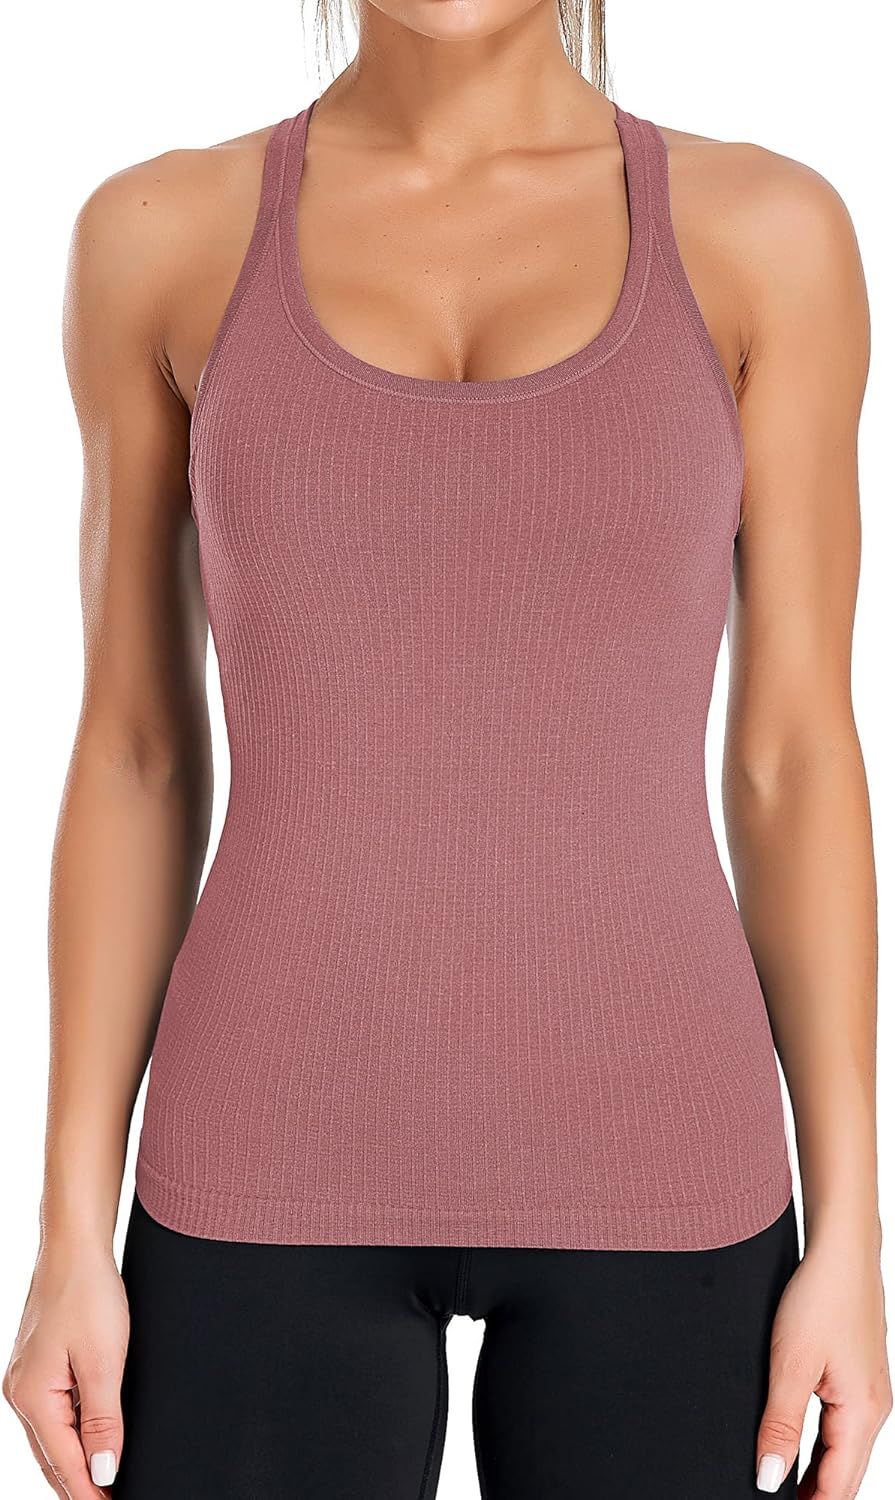 ATTRACO Ribbed Workout Tank Tops for Women with Built in Bra Tight Racerback Scoop Neck Athletic Top | Amazon (US)